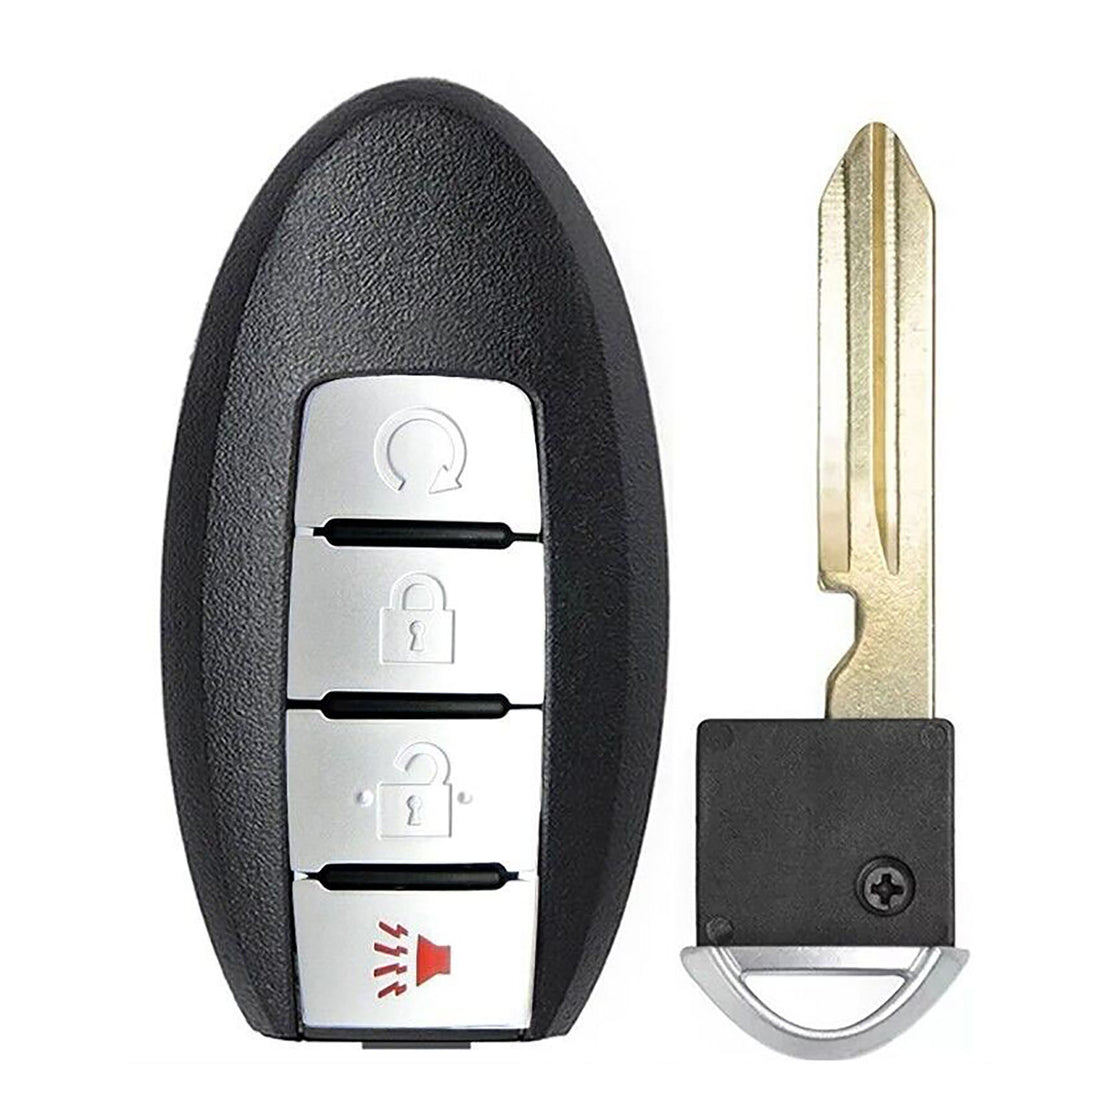 1x New Replacement Proximity Key Fob Compatible with & Fit For Nissan Vehicles Read Description - MPN S180144313-02